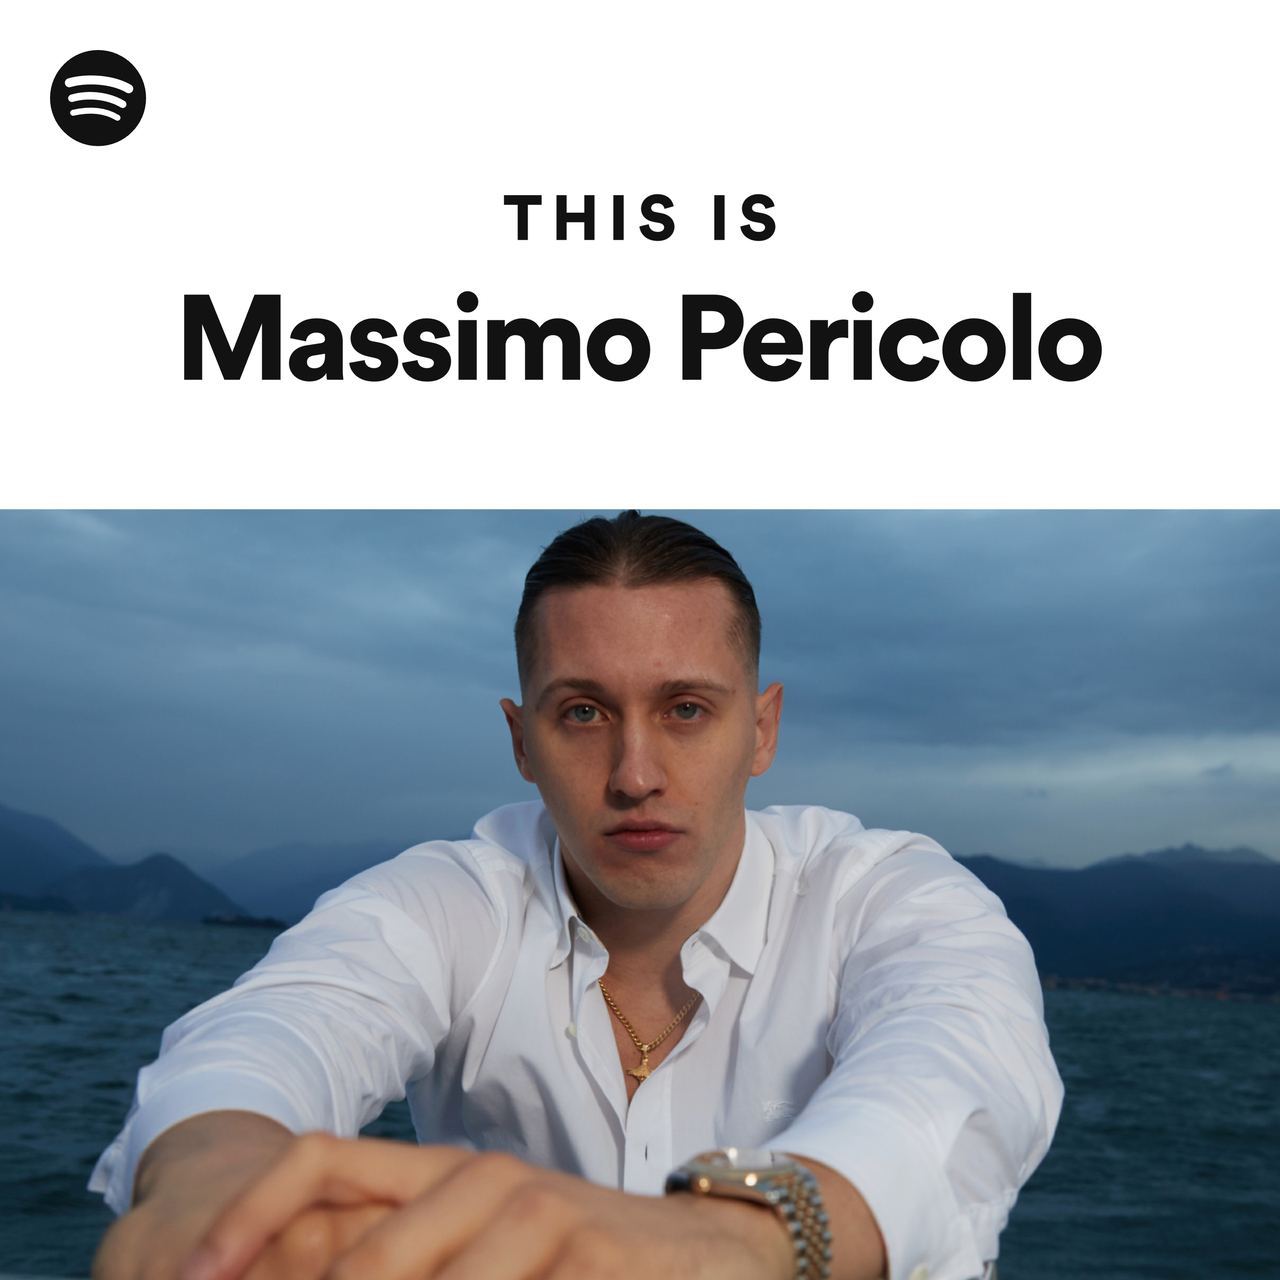 This Is Massimo Pericolo - playlist by Spotify